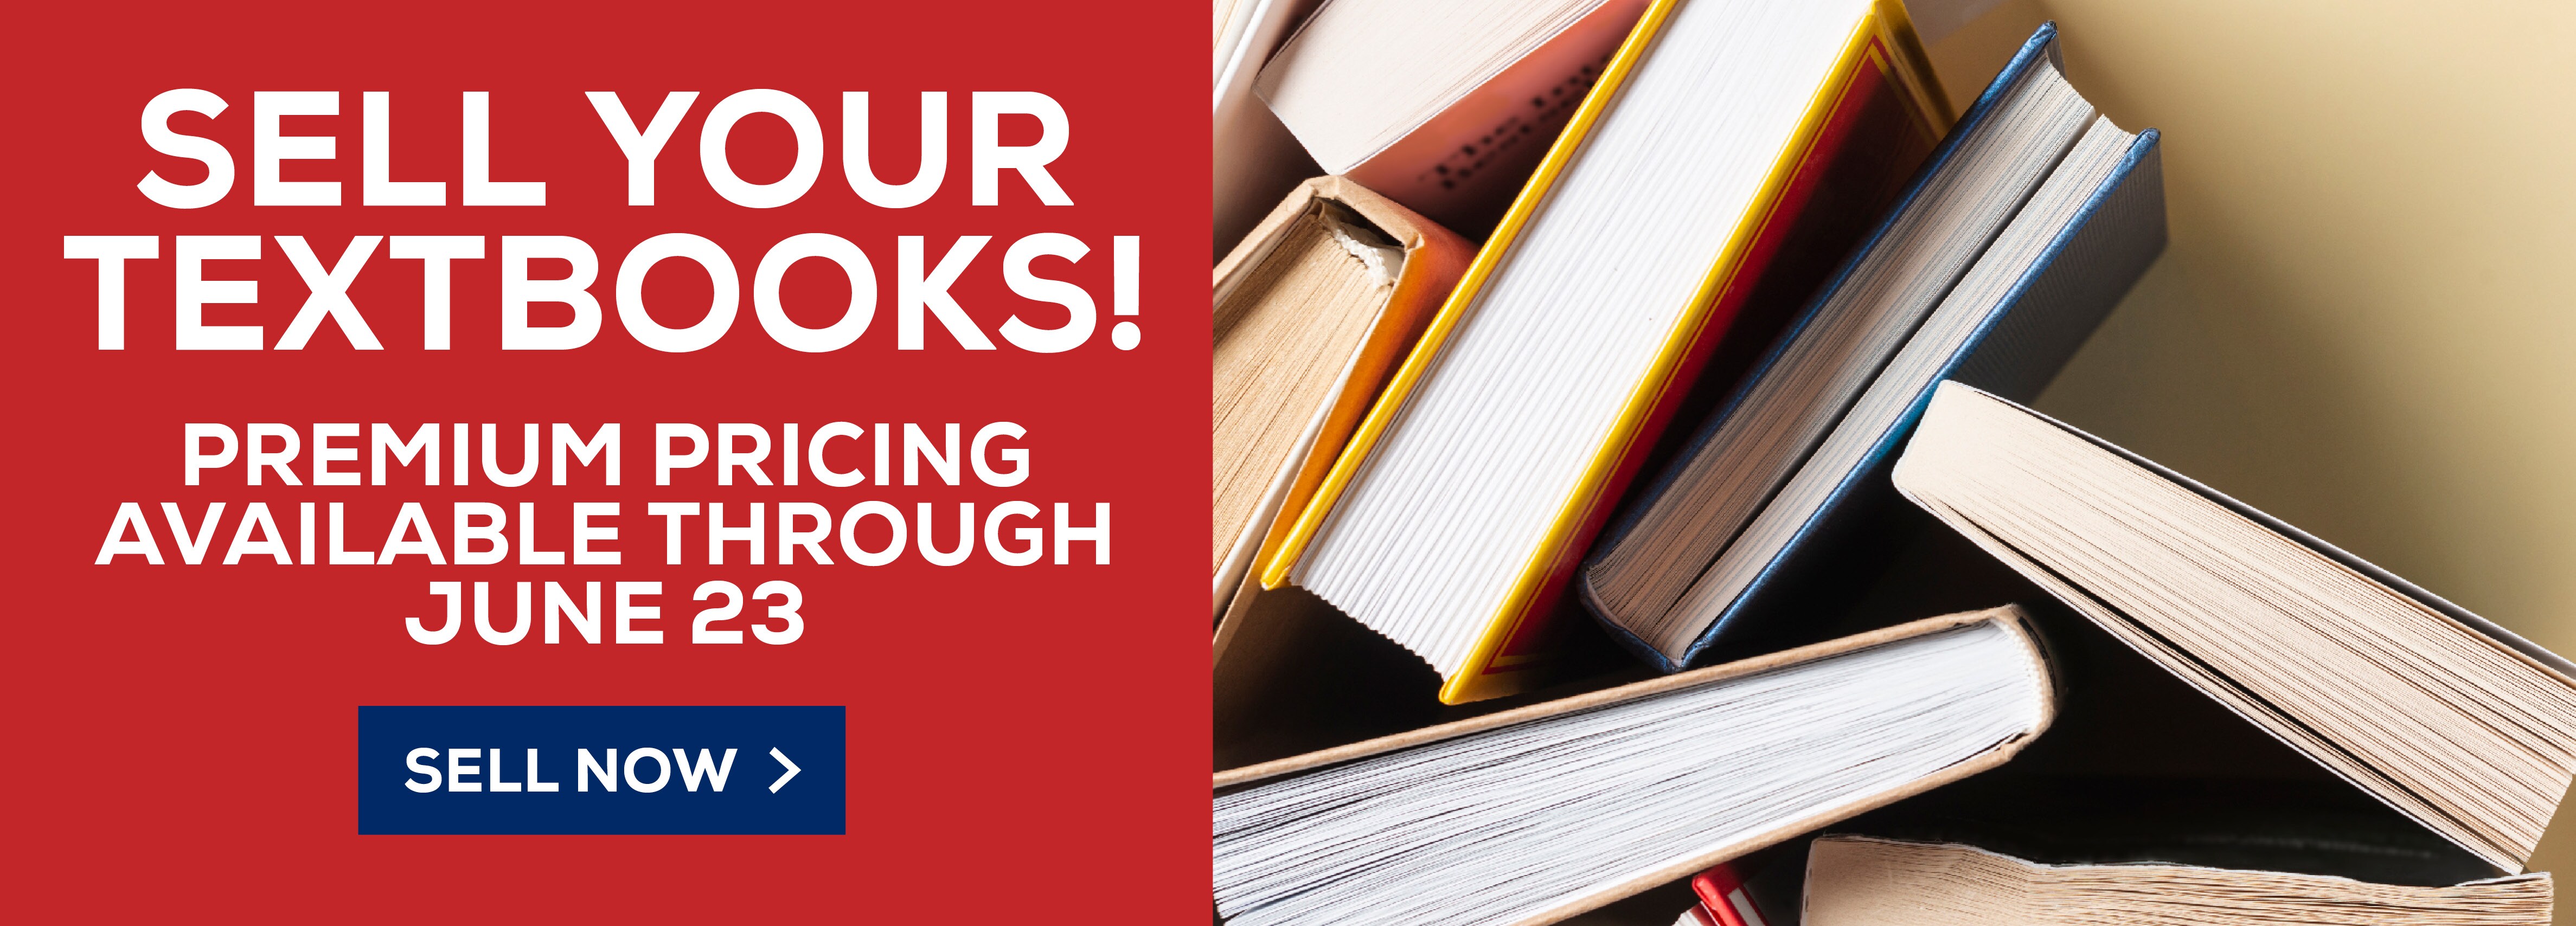 Sell Your Textbooks! Premium pricing available through June 23. Sell Now!					